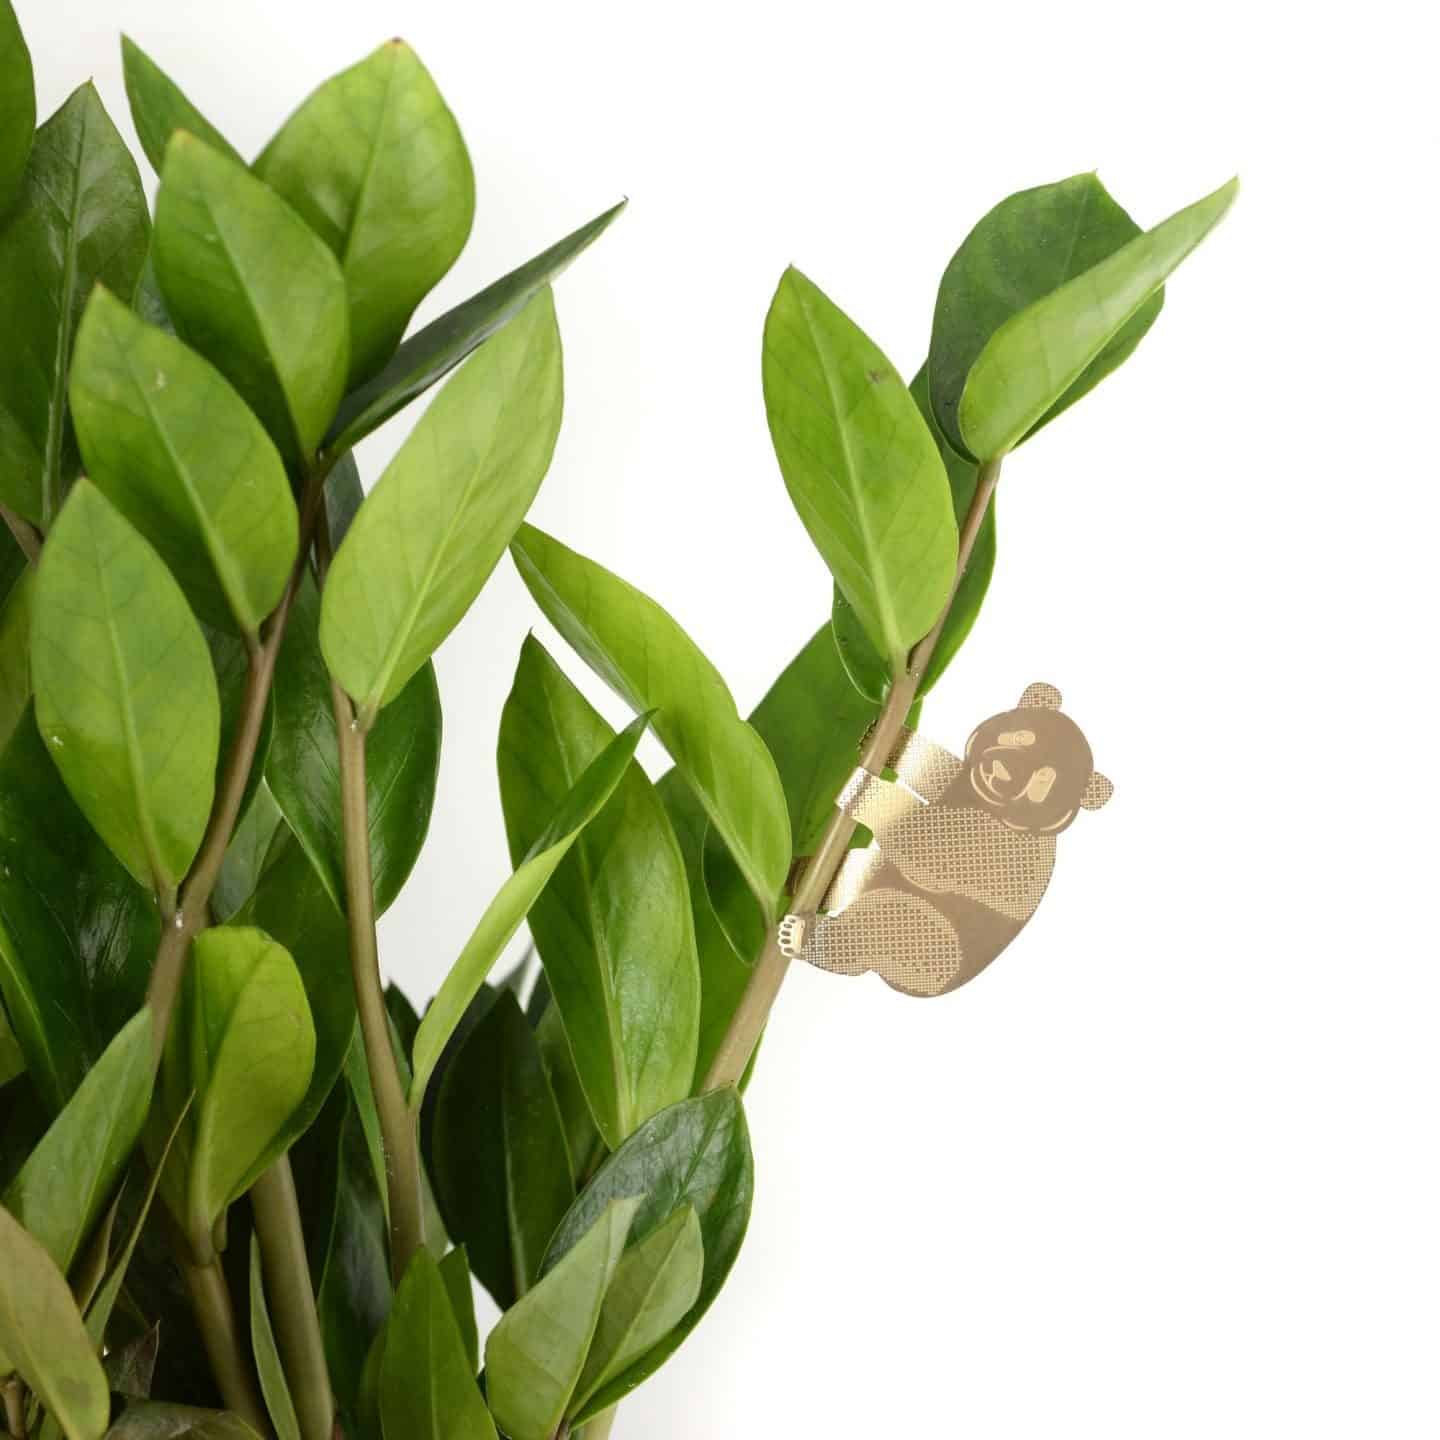 Gifts for plant lovers. These brass animal decorations from Another Studio can be hung on trees and plants 